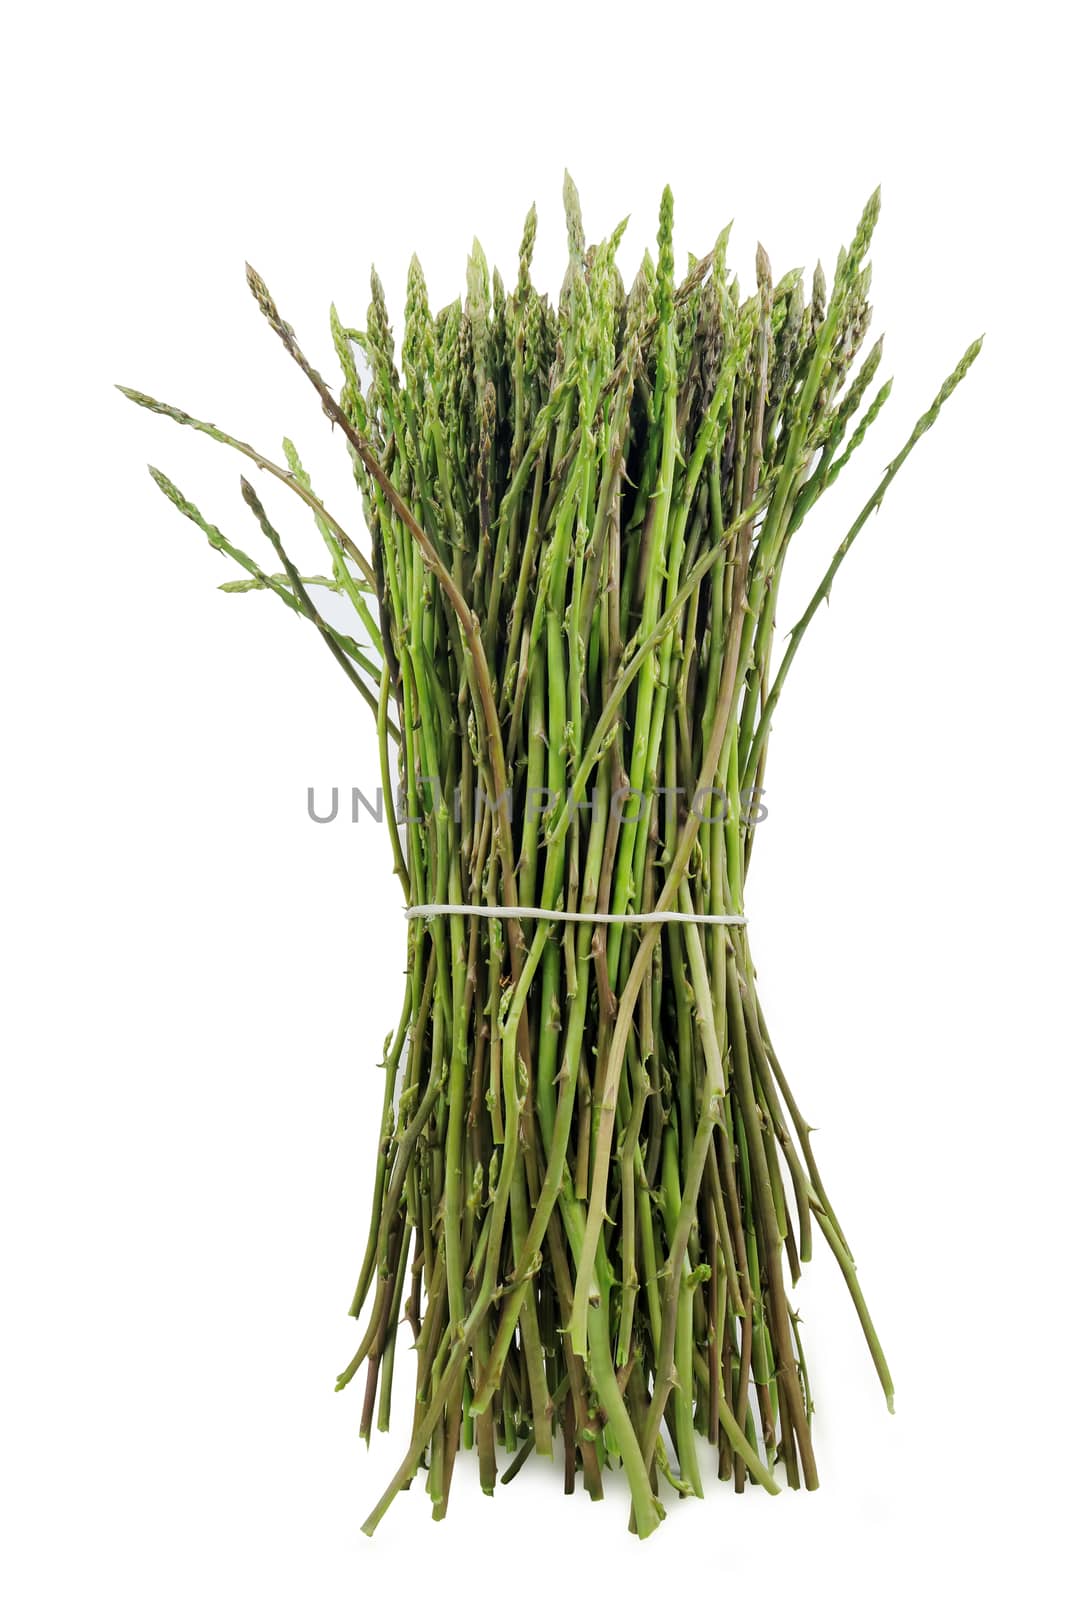 Wild asparagus by sewer12